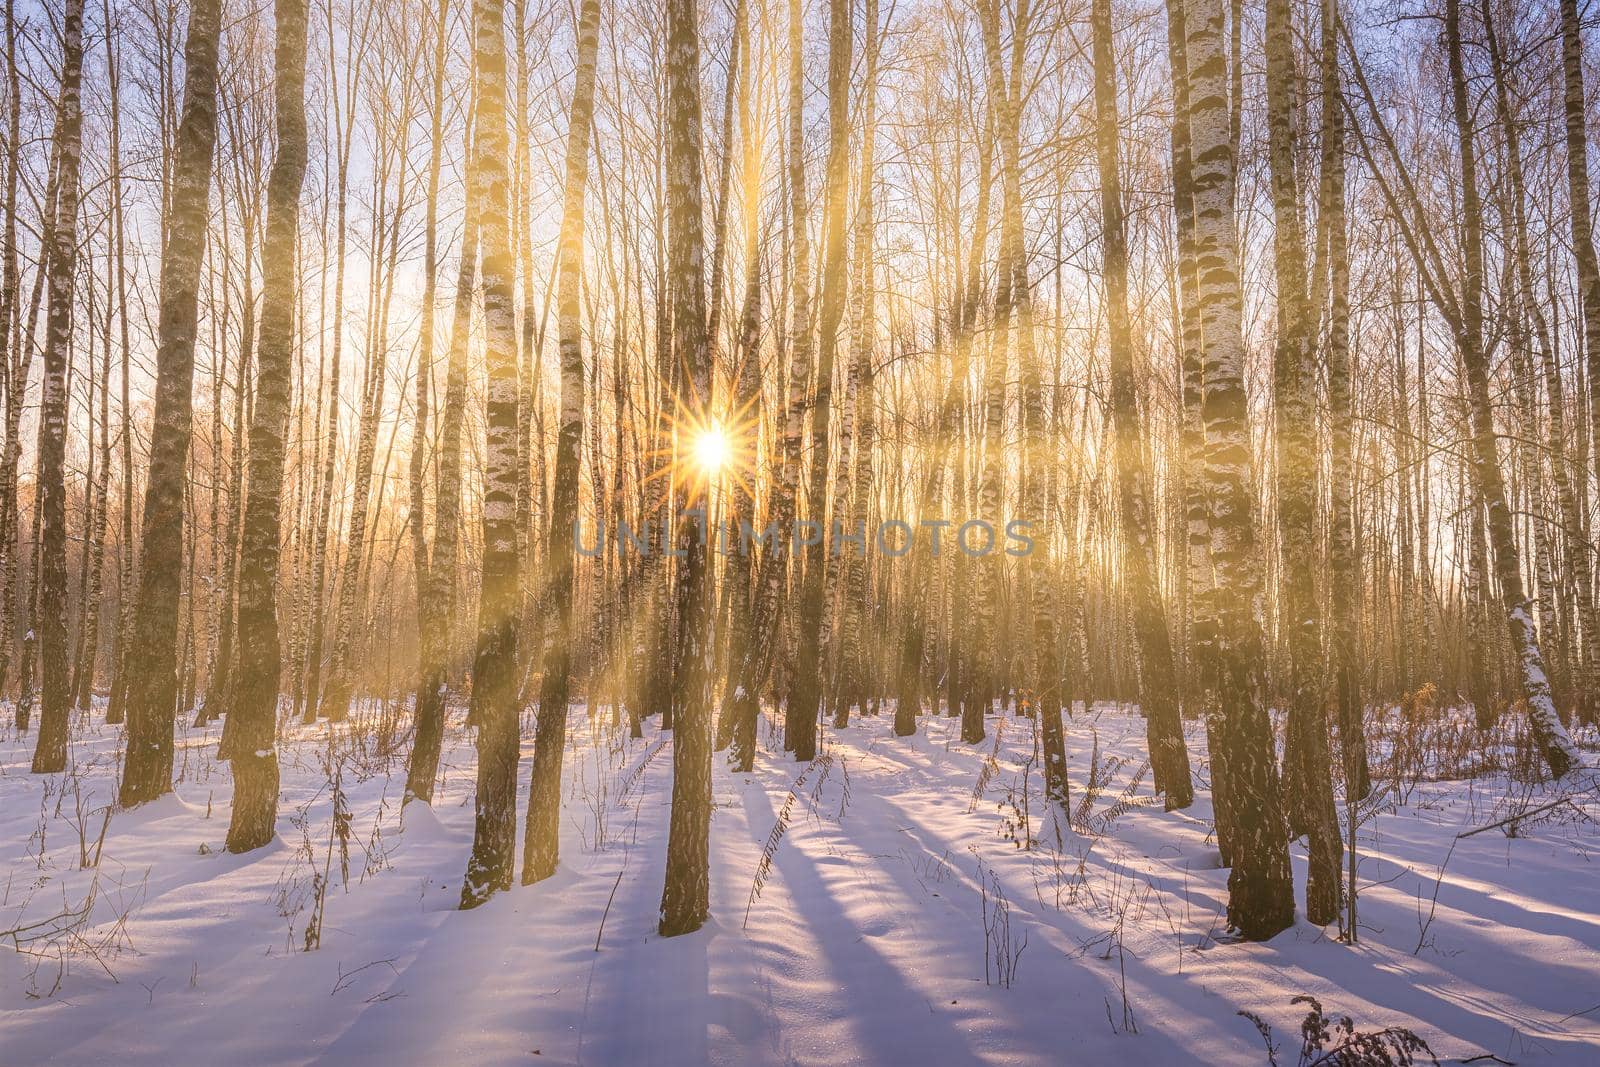 Sunset or sunrise in a birch grove with winter snow. Rows of birch trunks with the sun's rays. by Eugene_Yemelyanov